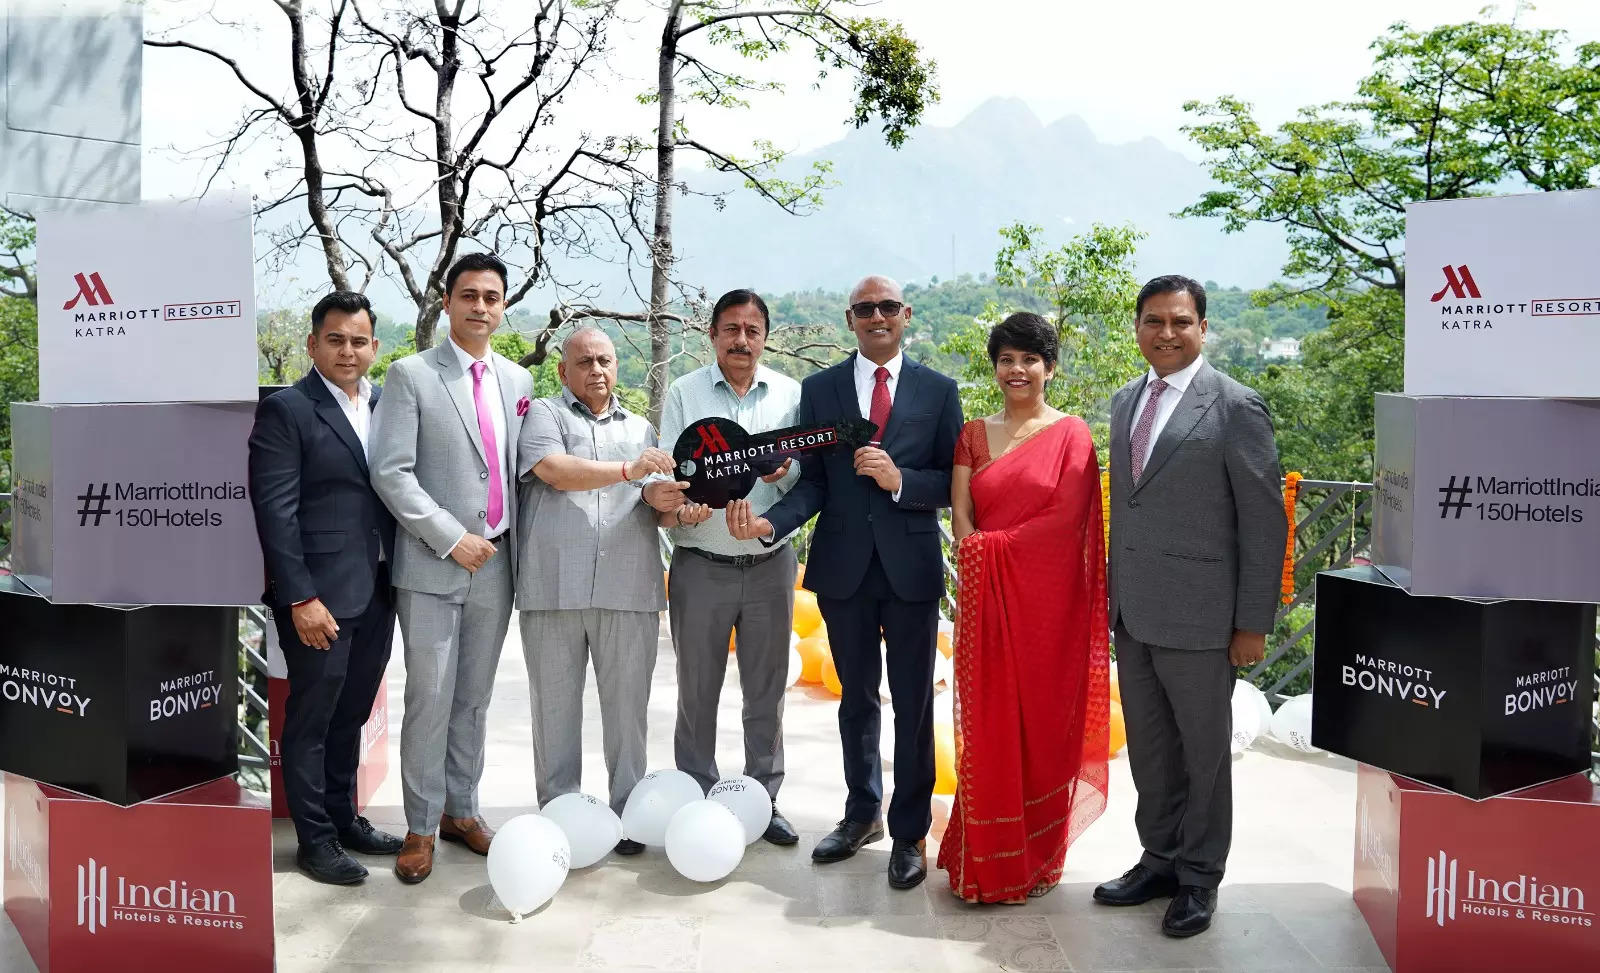 Marriott opens its 150th hotel in India with launch of Katra Marriott Resort & Spa